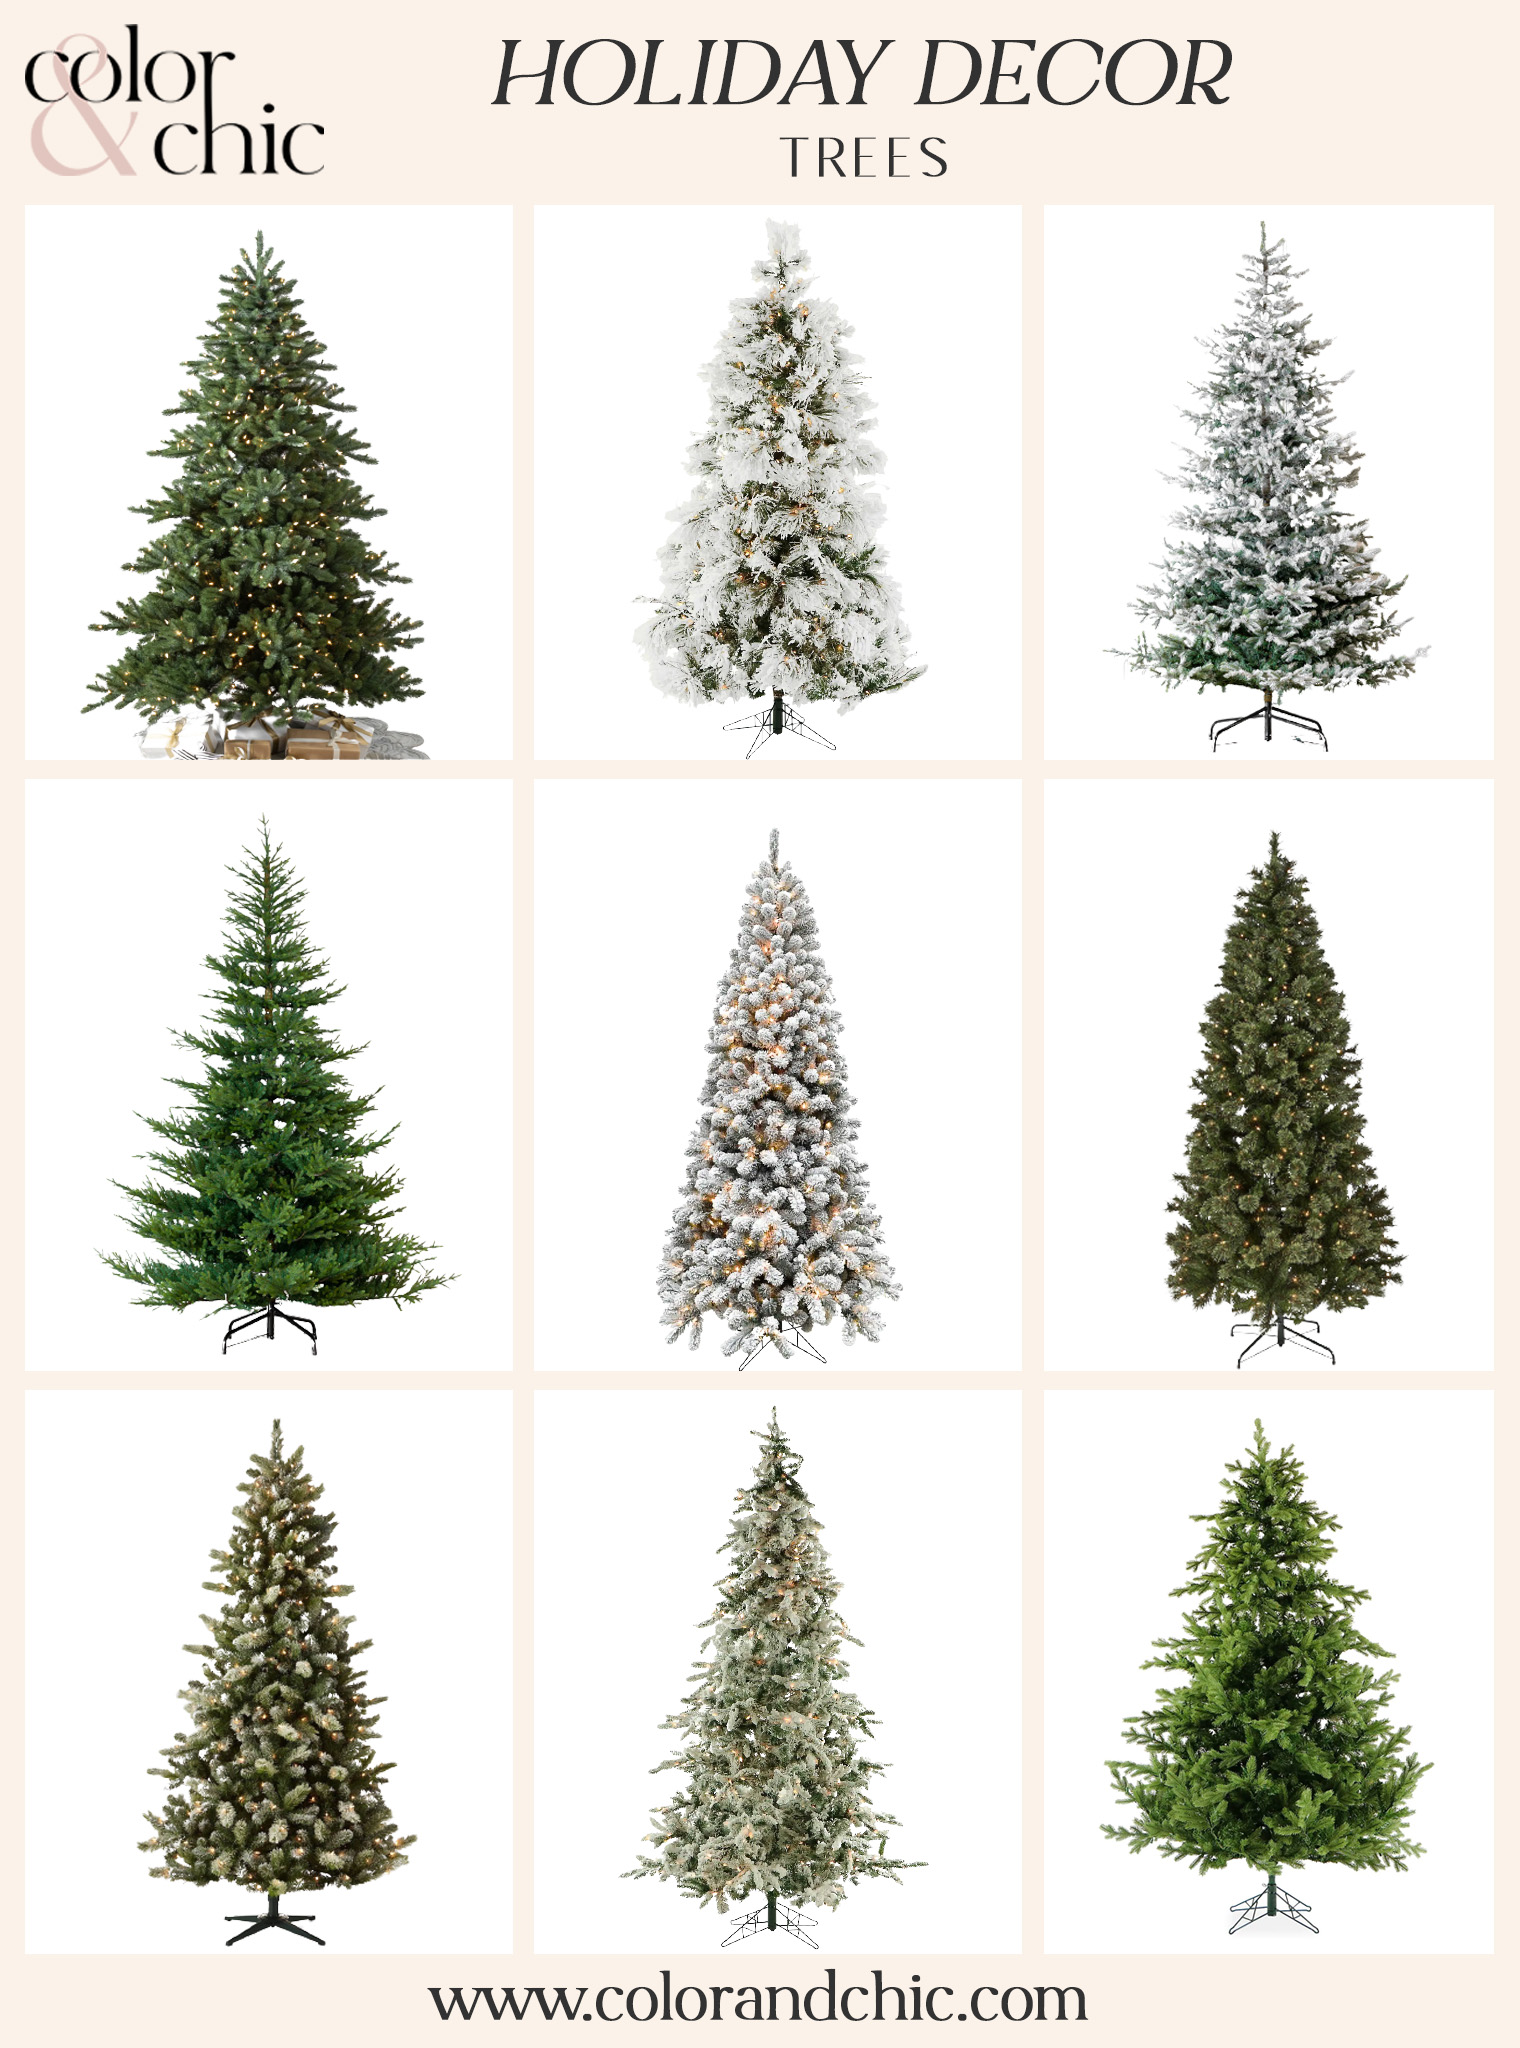 Christmas decor ideas from blogger Hoang-Kim Cung including fake Christmas trees